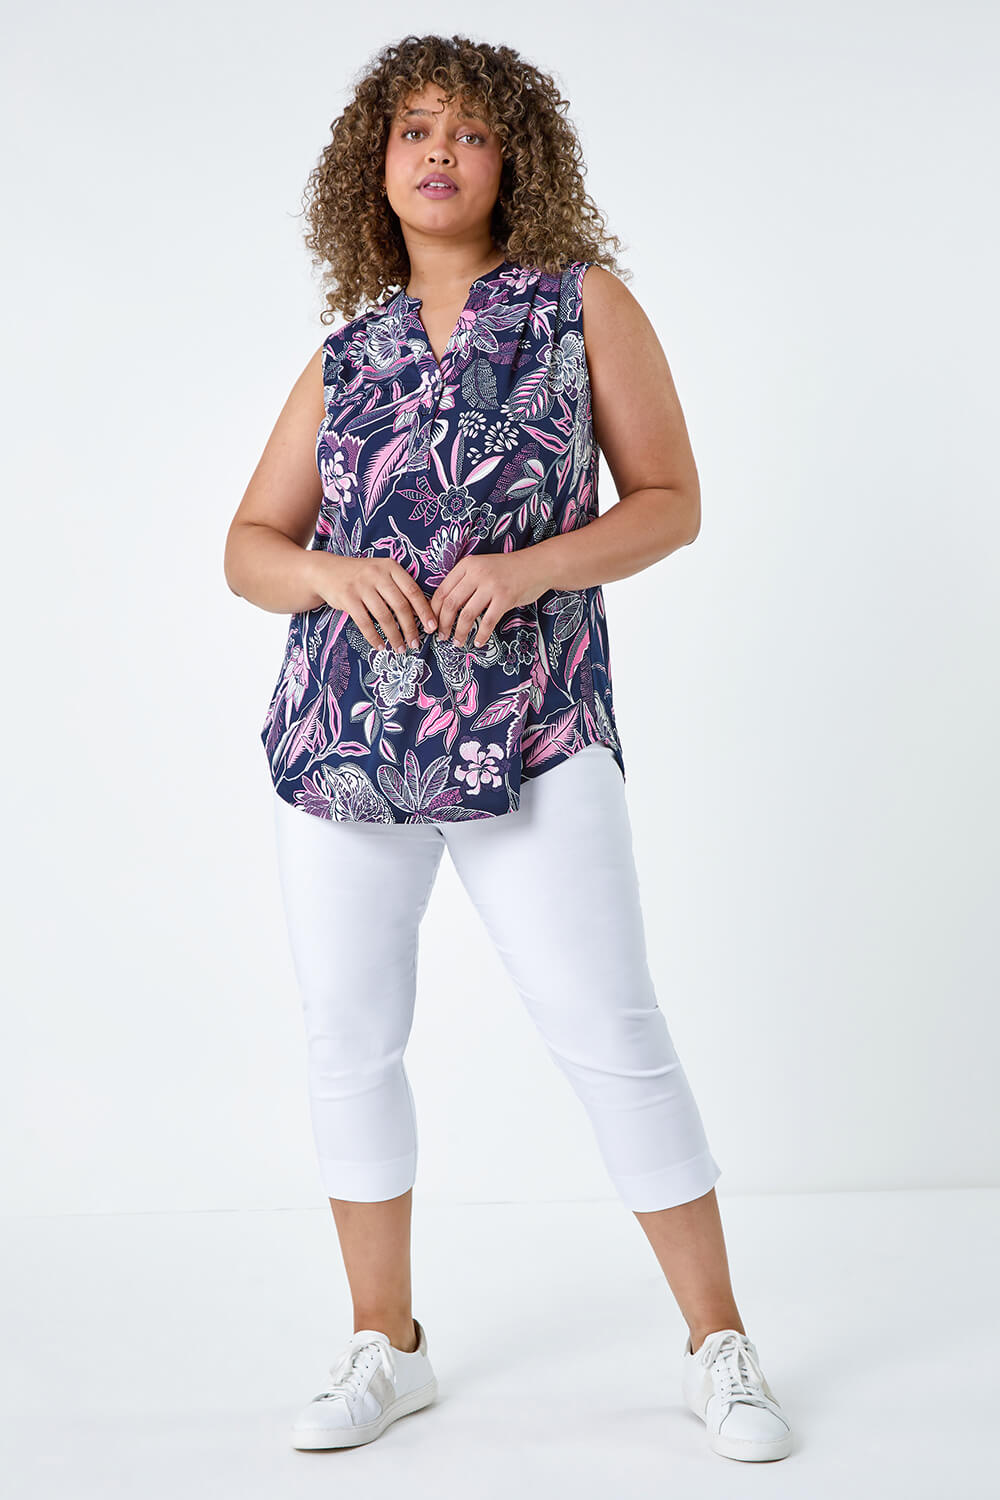 PINK Curve Textured Floral Print Stretch Top, Image 2 of 5